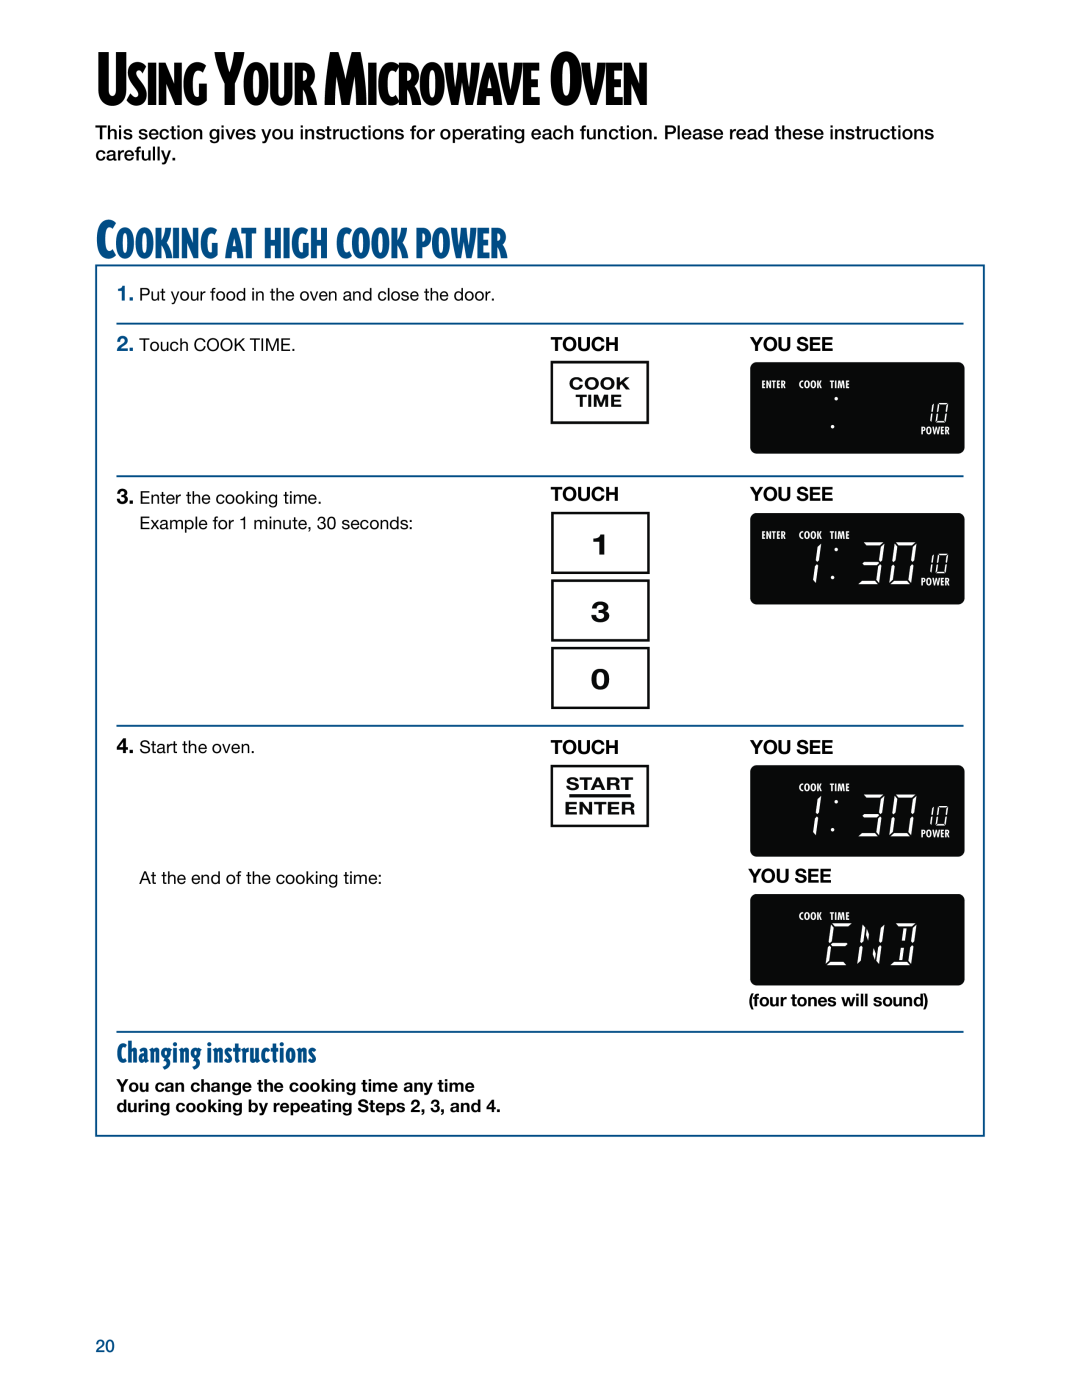 Whirlpool MHE14RF Cooking At High Cook Power, Changing instructions, Using Your Microwave Oven, You See, Touch, Cook Time 